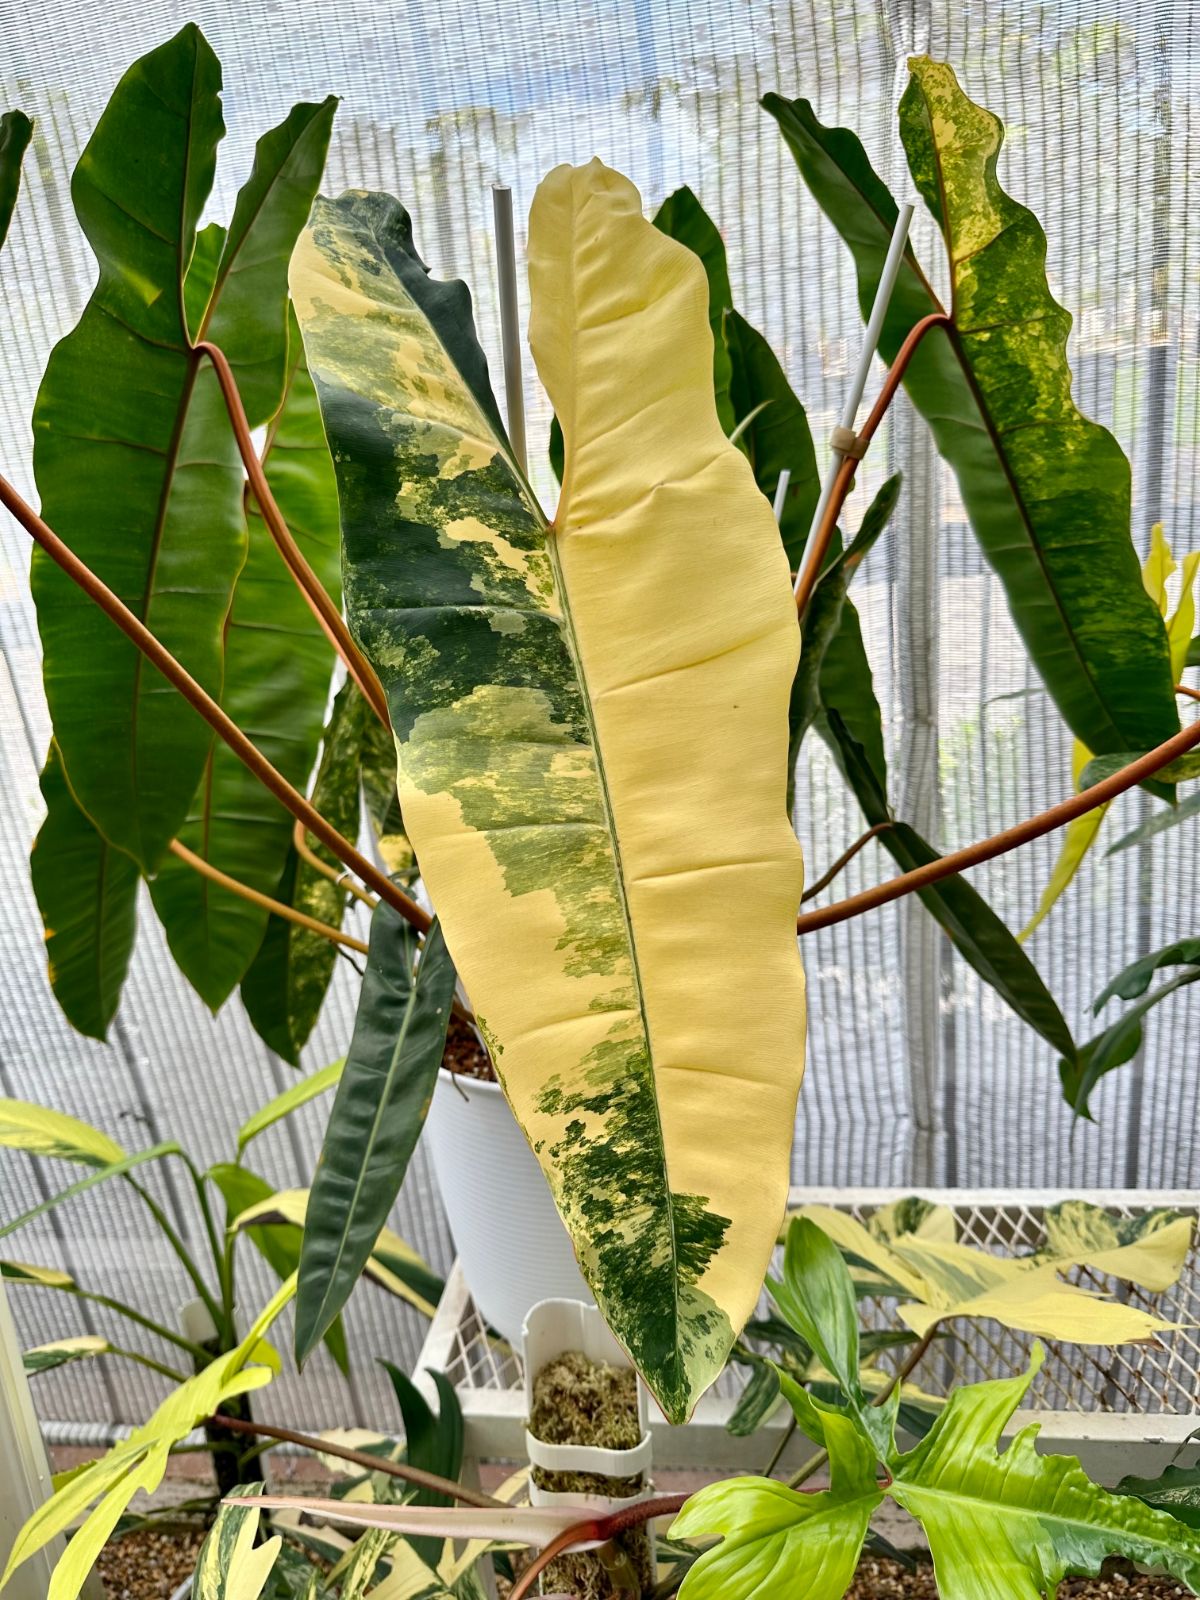 Philodendron Billietae is an expensive and rare variegated plant